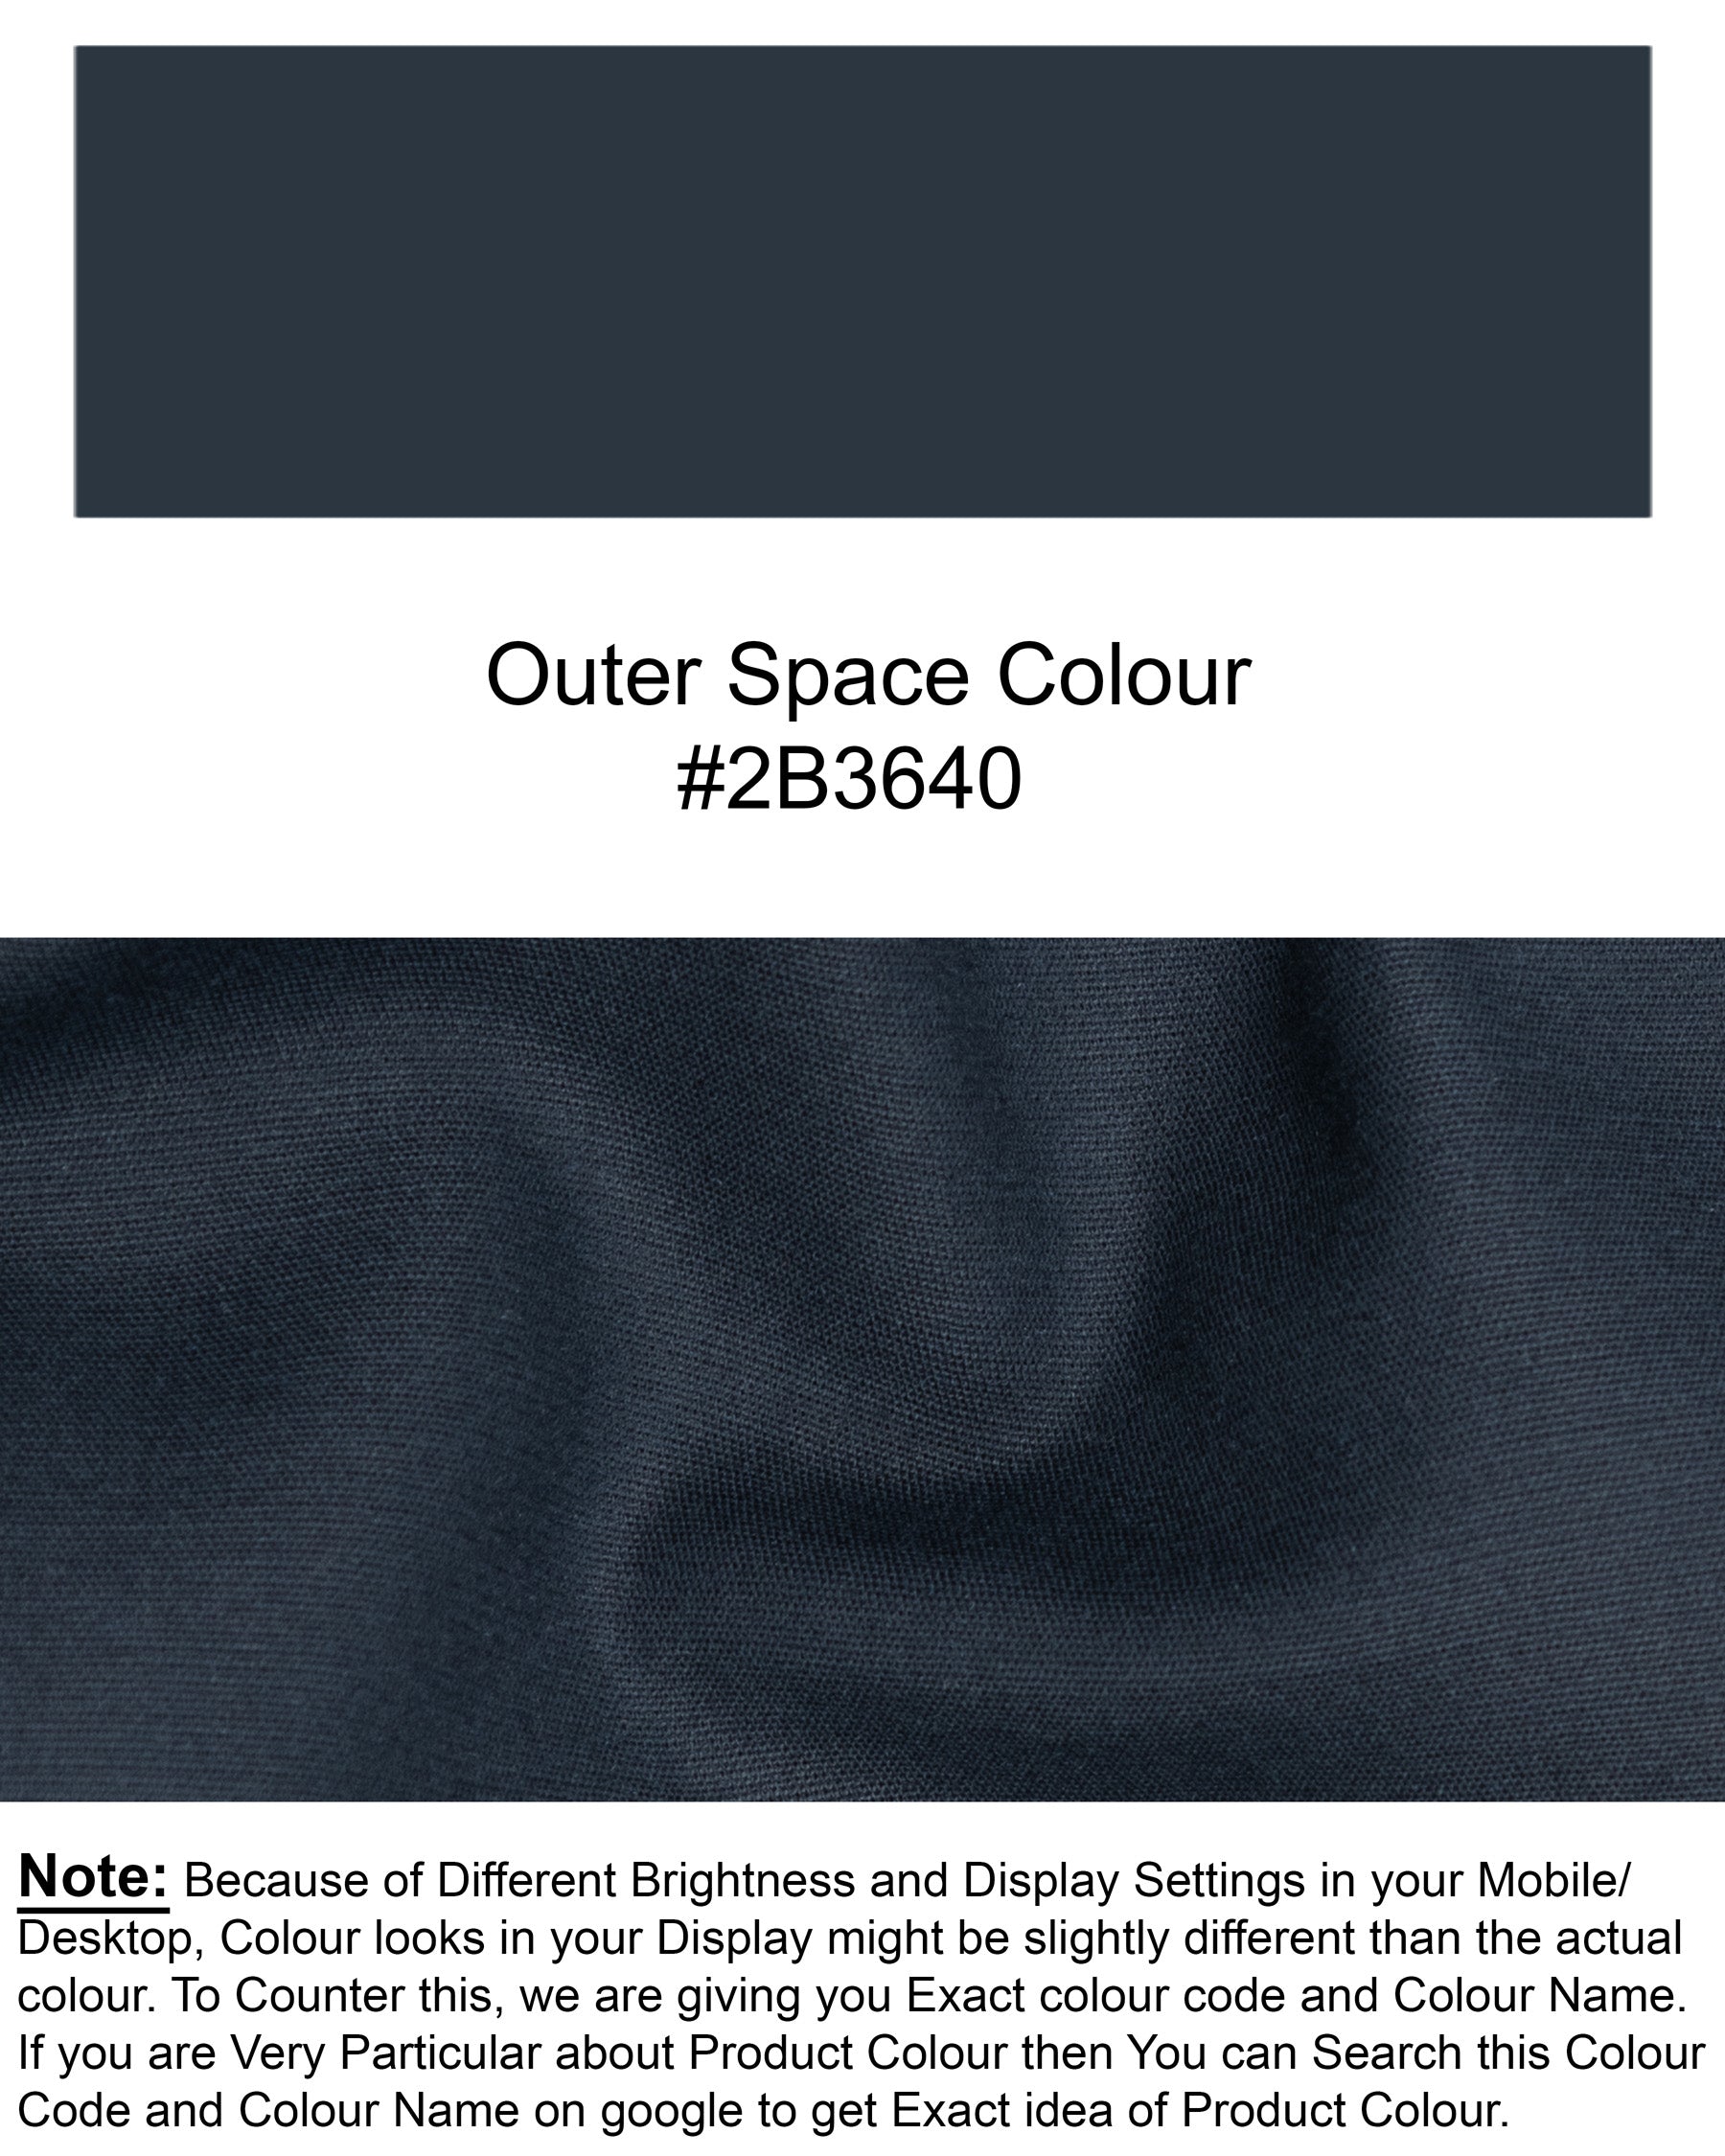 Outer Space Blue Double-Breasted Premium Cotton Blazer BL1294-DB-36, BL1294-DB-38, BL1294-DB-40, BL1294-DB-42, BL1294-DB-44, BL1294-DB-50, BL1294-DB-52, BL1294-DB-56, BL1294-DB-60, BL1294-DB-46, BL1294-DB-48, BL1294-DB-54, BL1294-DB-58